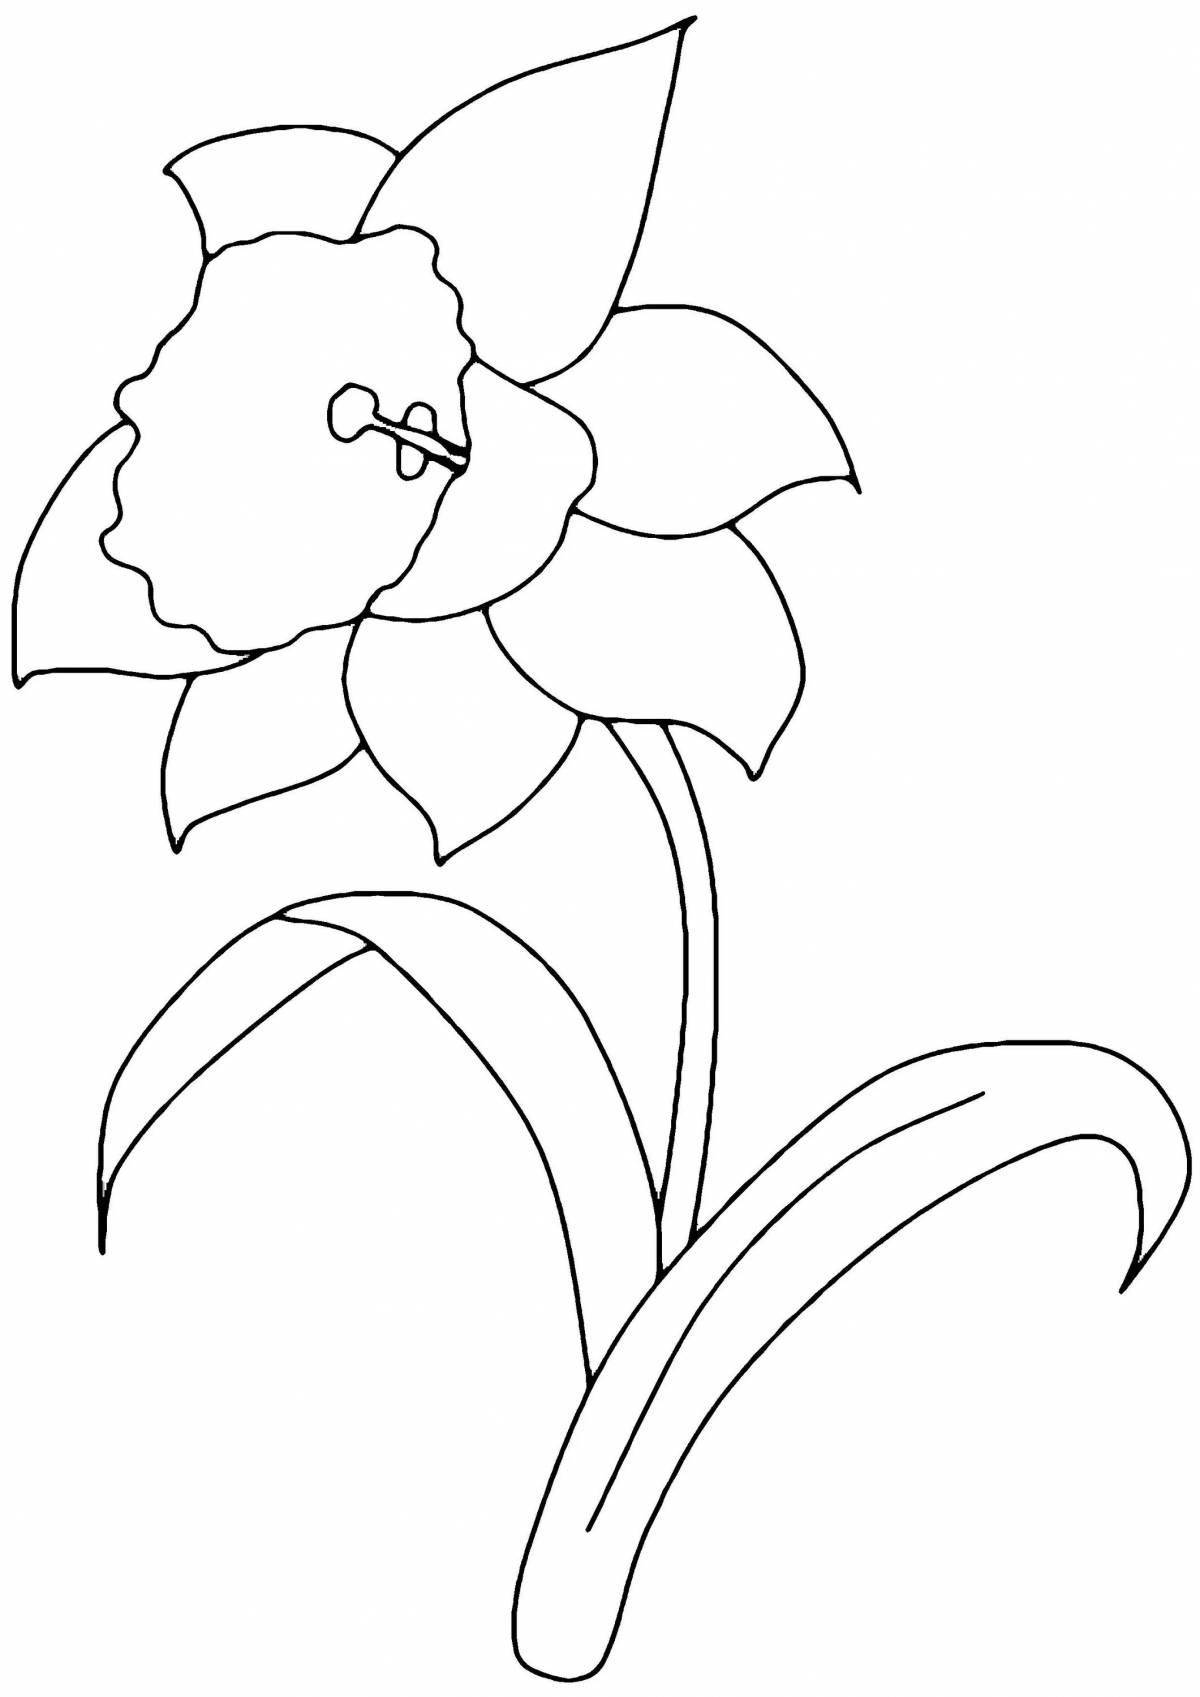 Coloring book playful narcissus flower